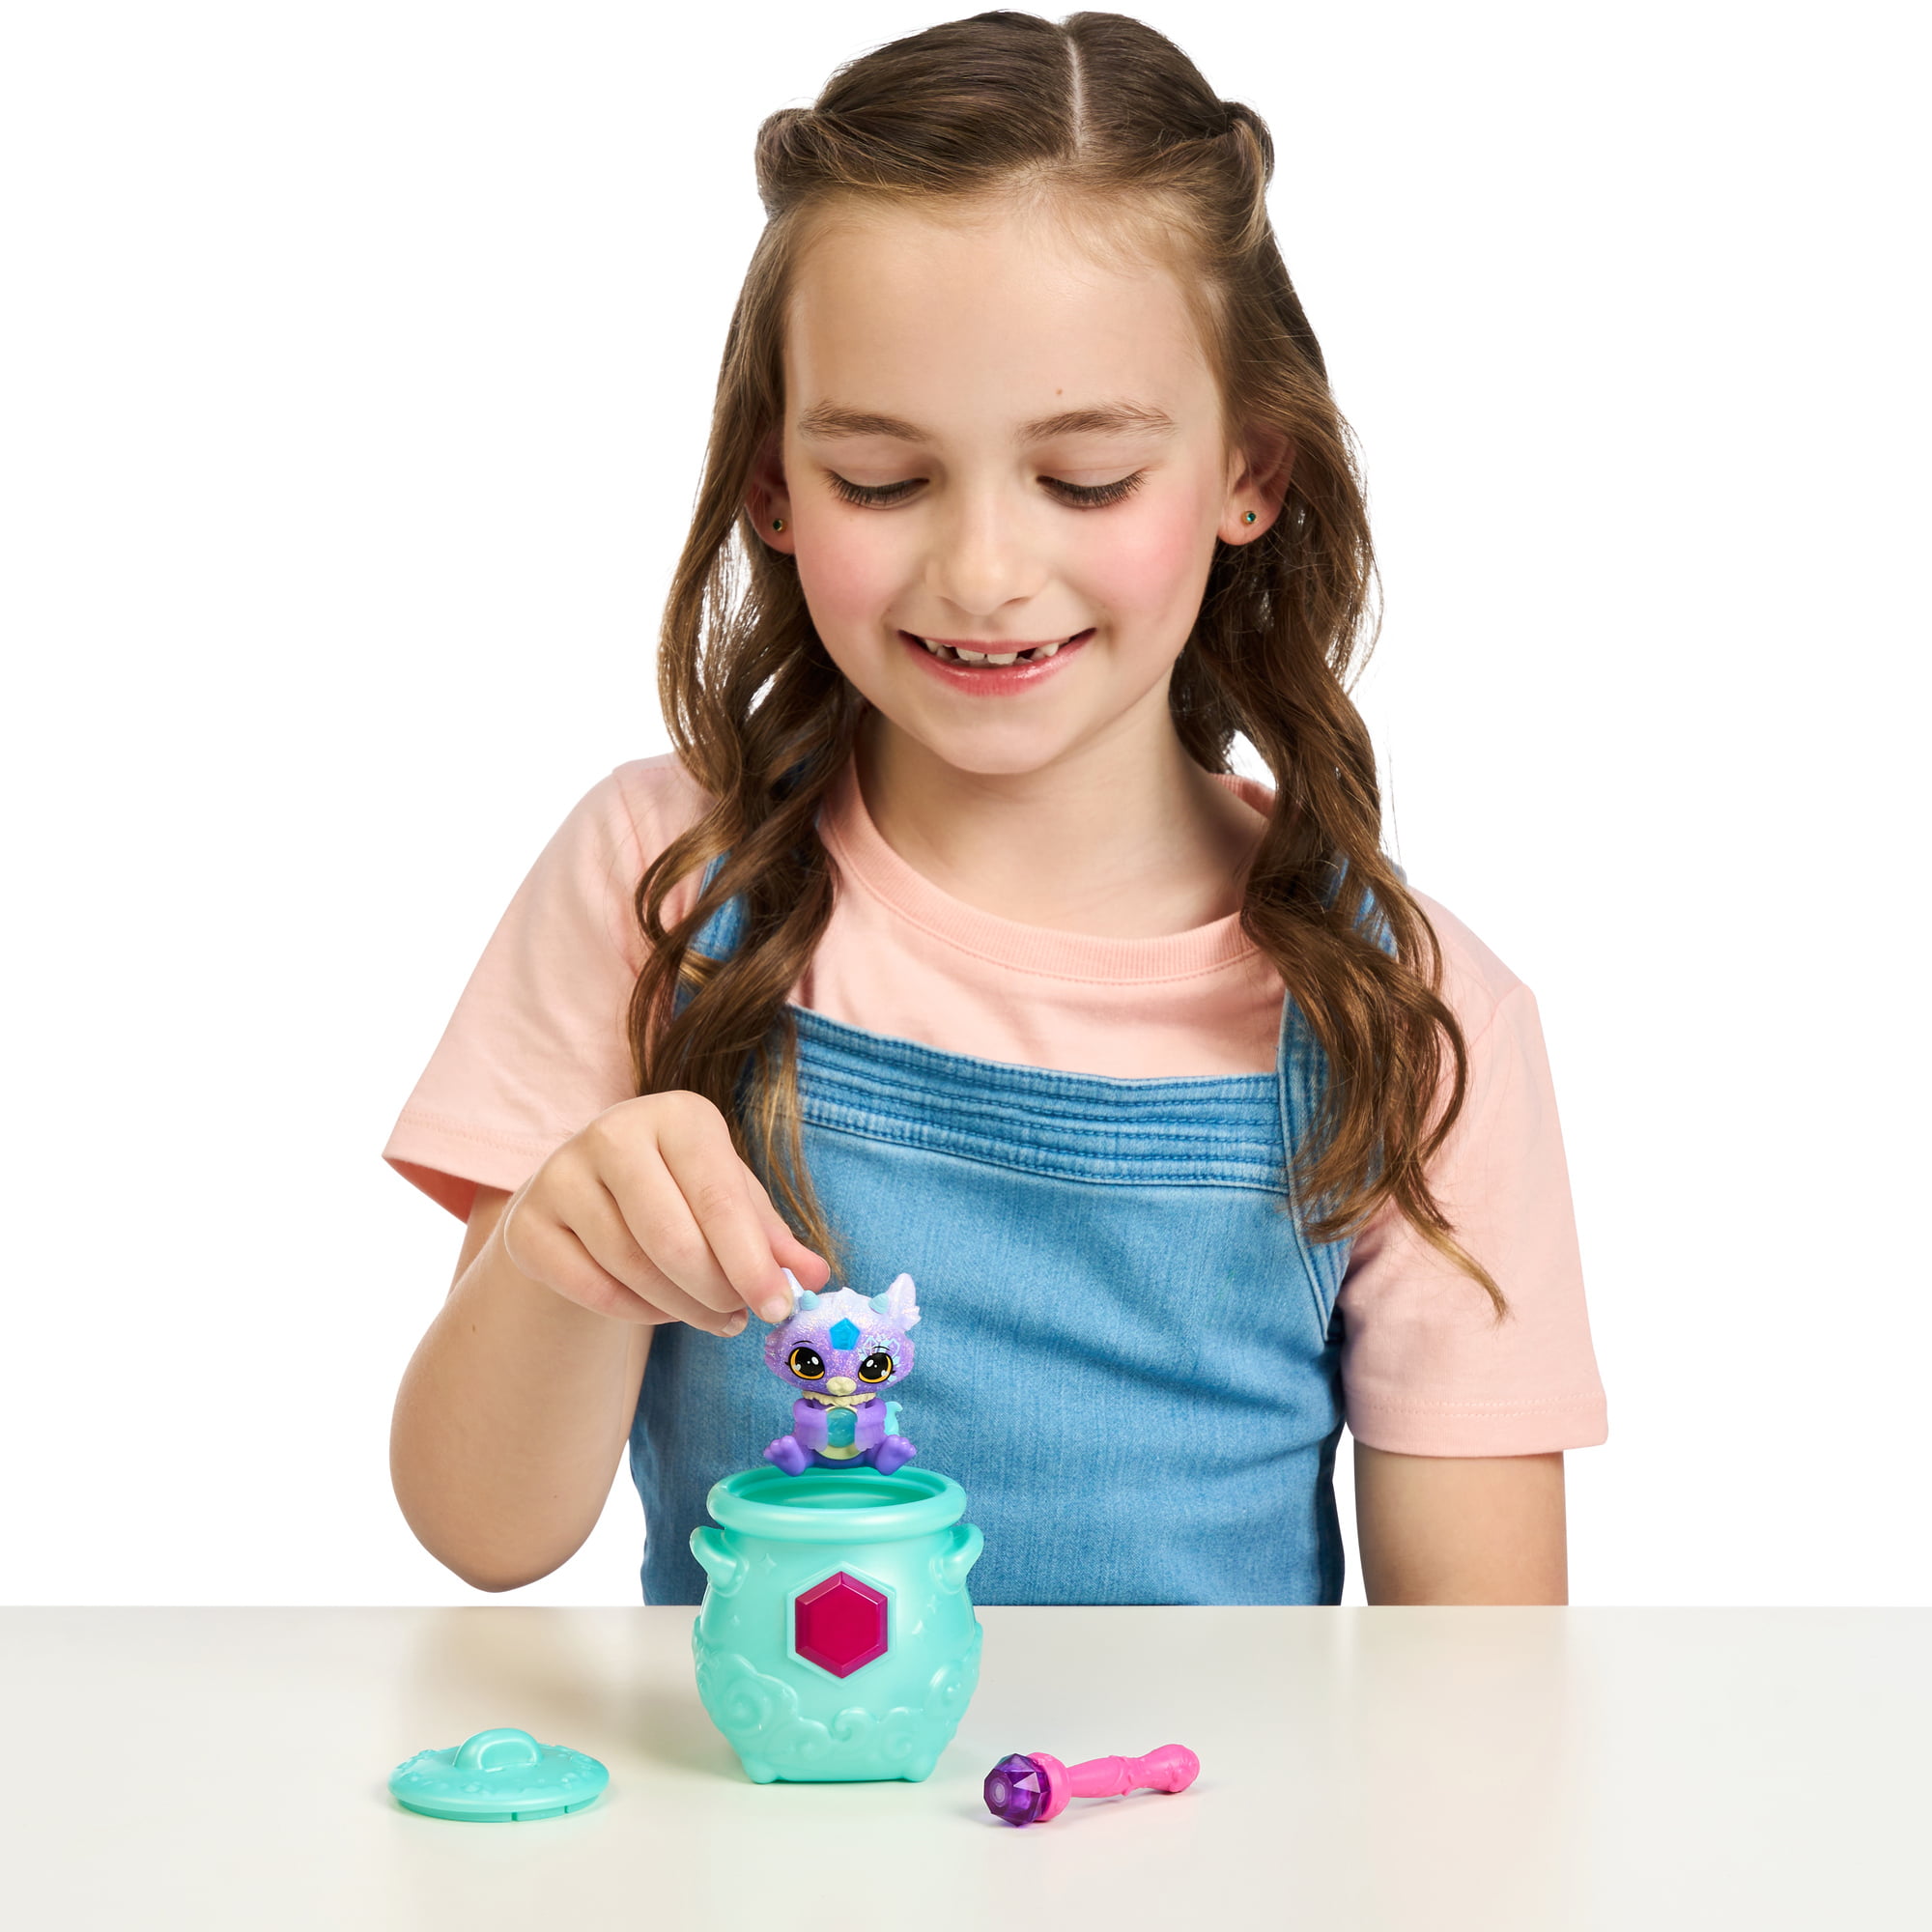 Magic Mixies Mixlings Shimmer Magic Mega 4 Pack, Magic Wand Reveals Magic  Power, Powers Unleashed Series, for Kids Aged 5 and Up, Multicolor (14692)